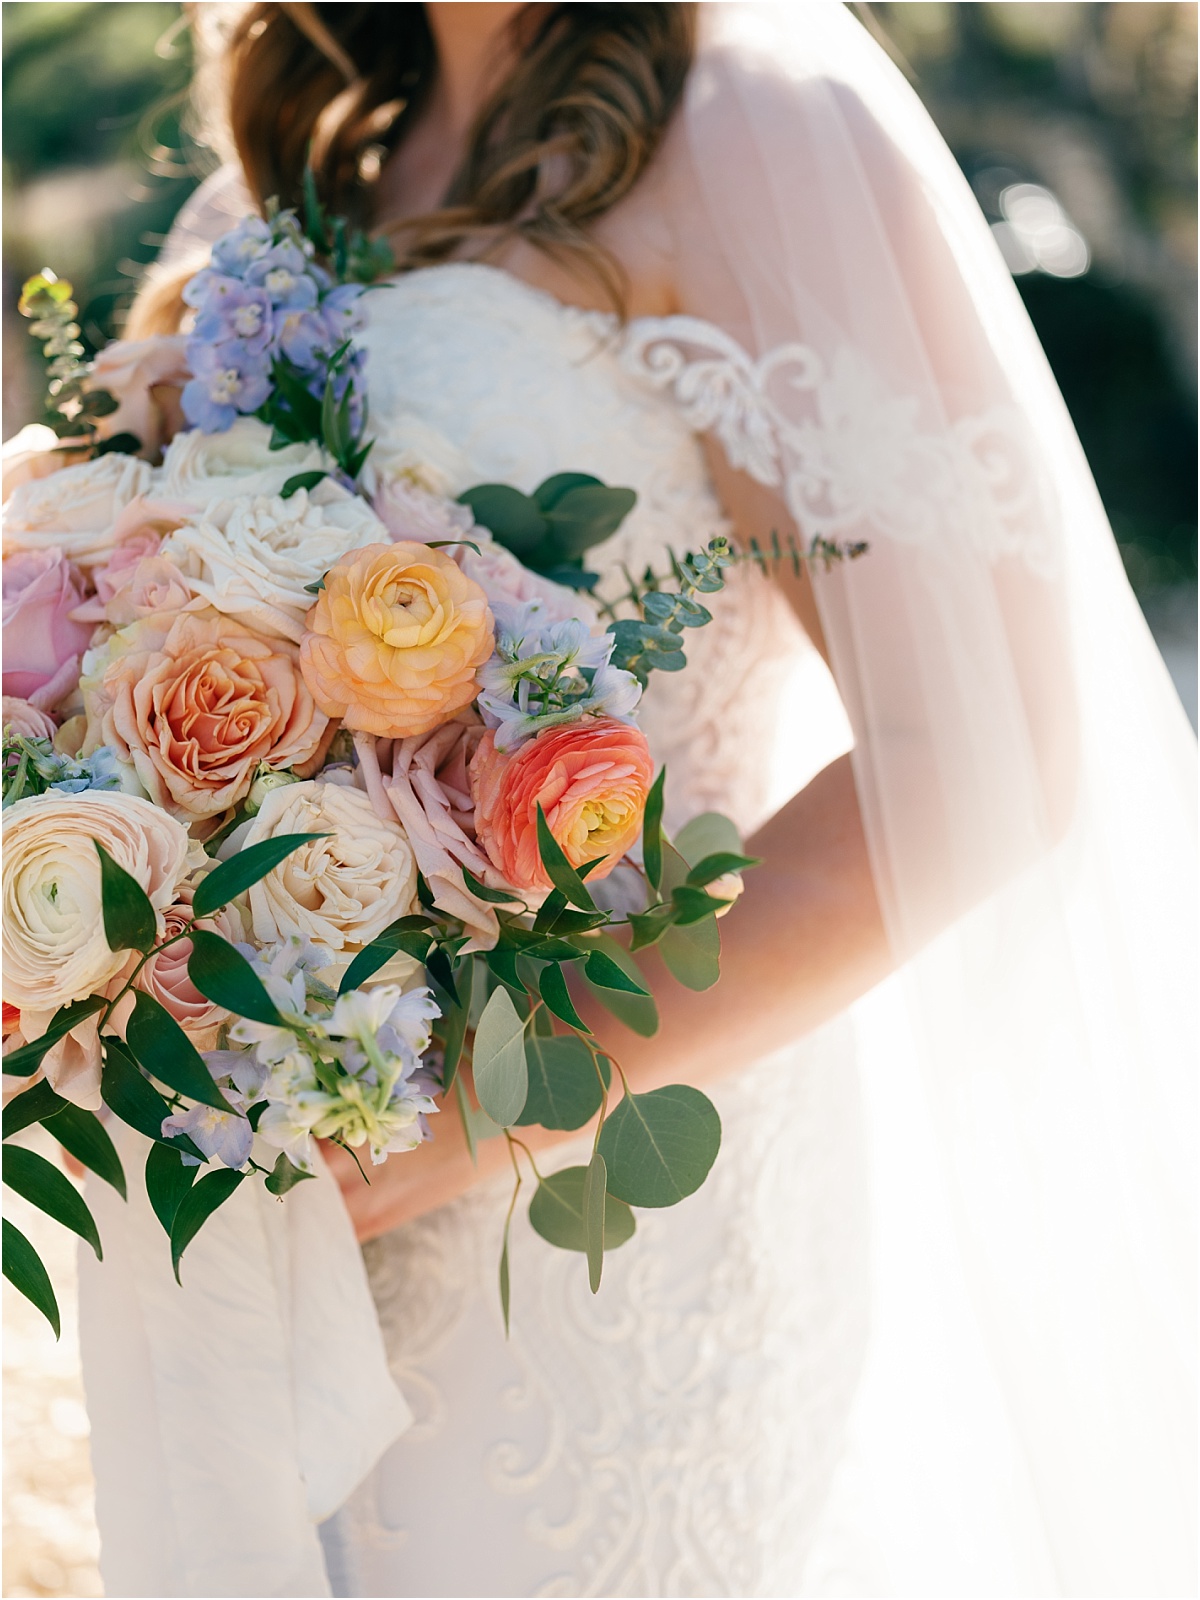 Dream Wedding at Hayes Hollow